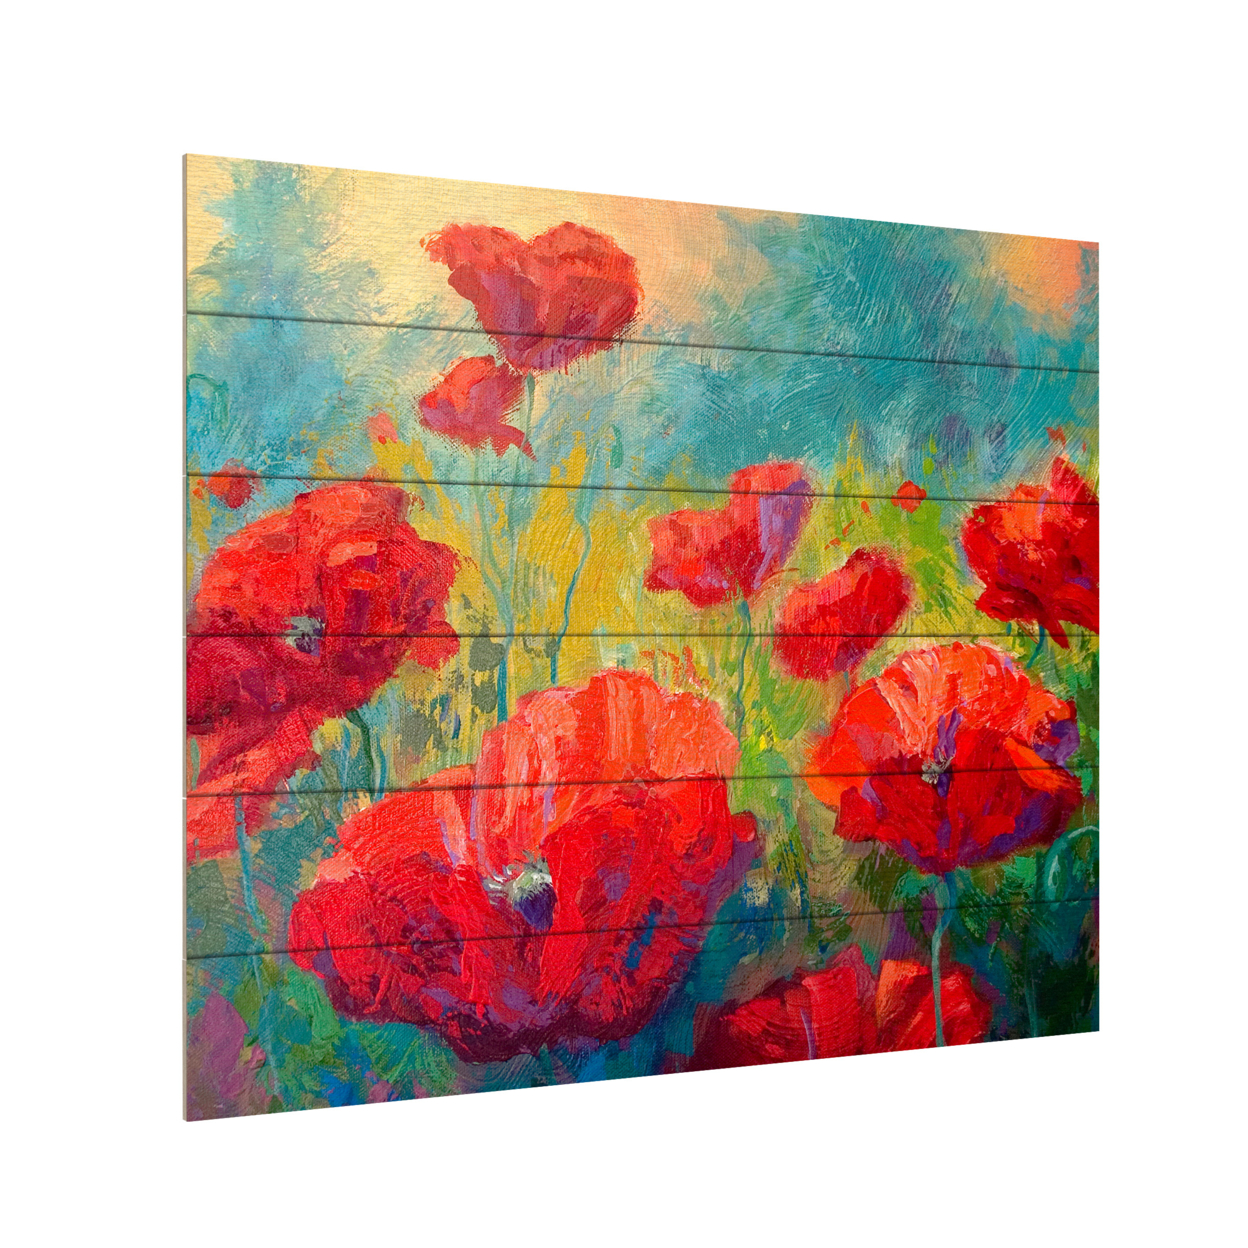 Wooden Slat Art 18 X 22 Inches Titled Field Of Poppies Ready To Hang Home Decor Picture